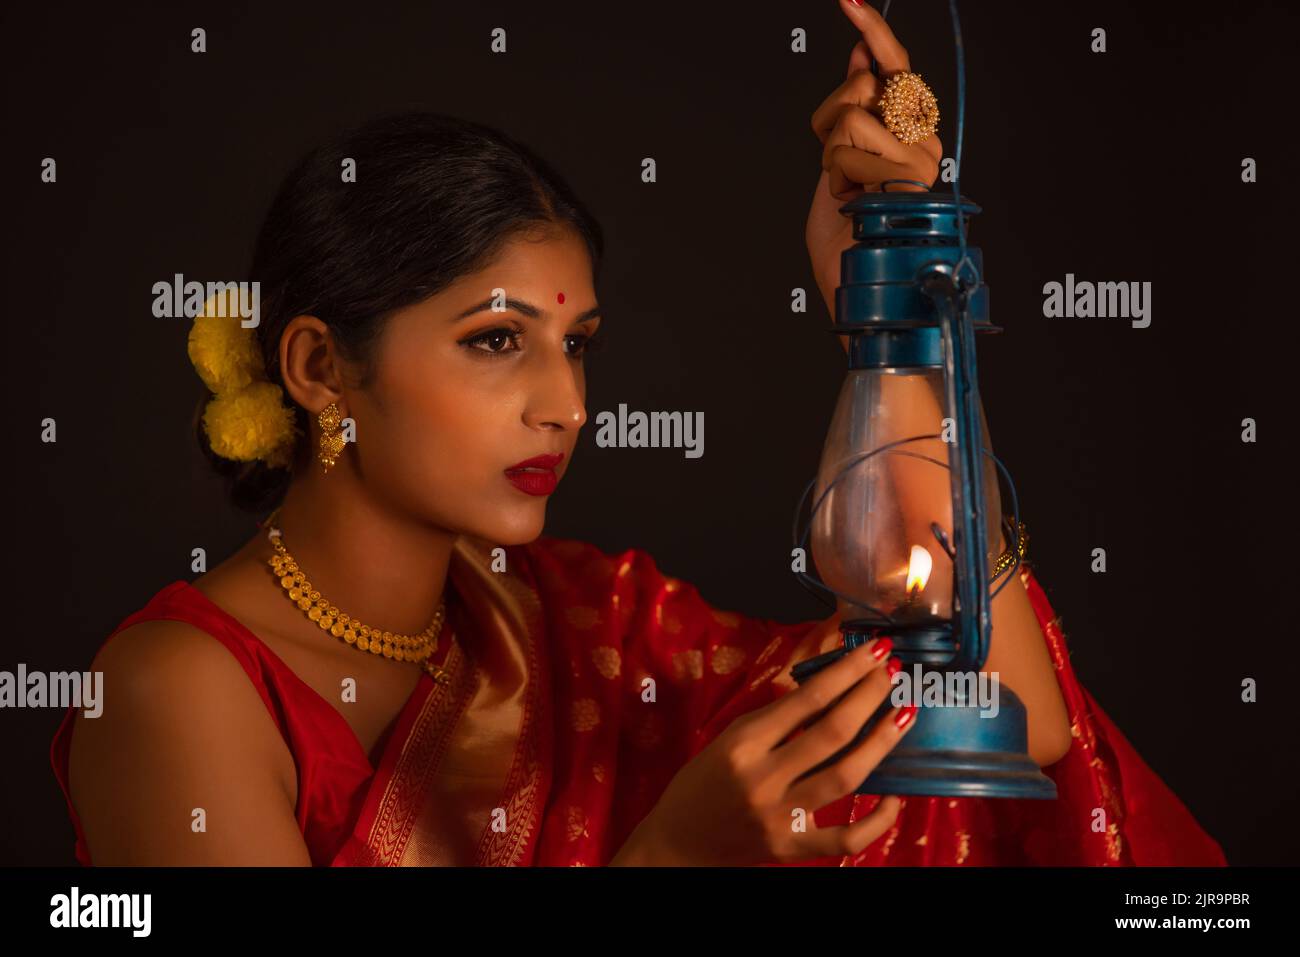 Close-up of a woman in red sari holding lantern against dark background Stock Photo